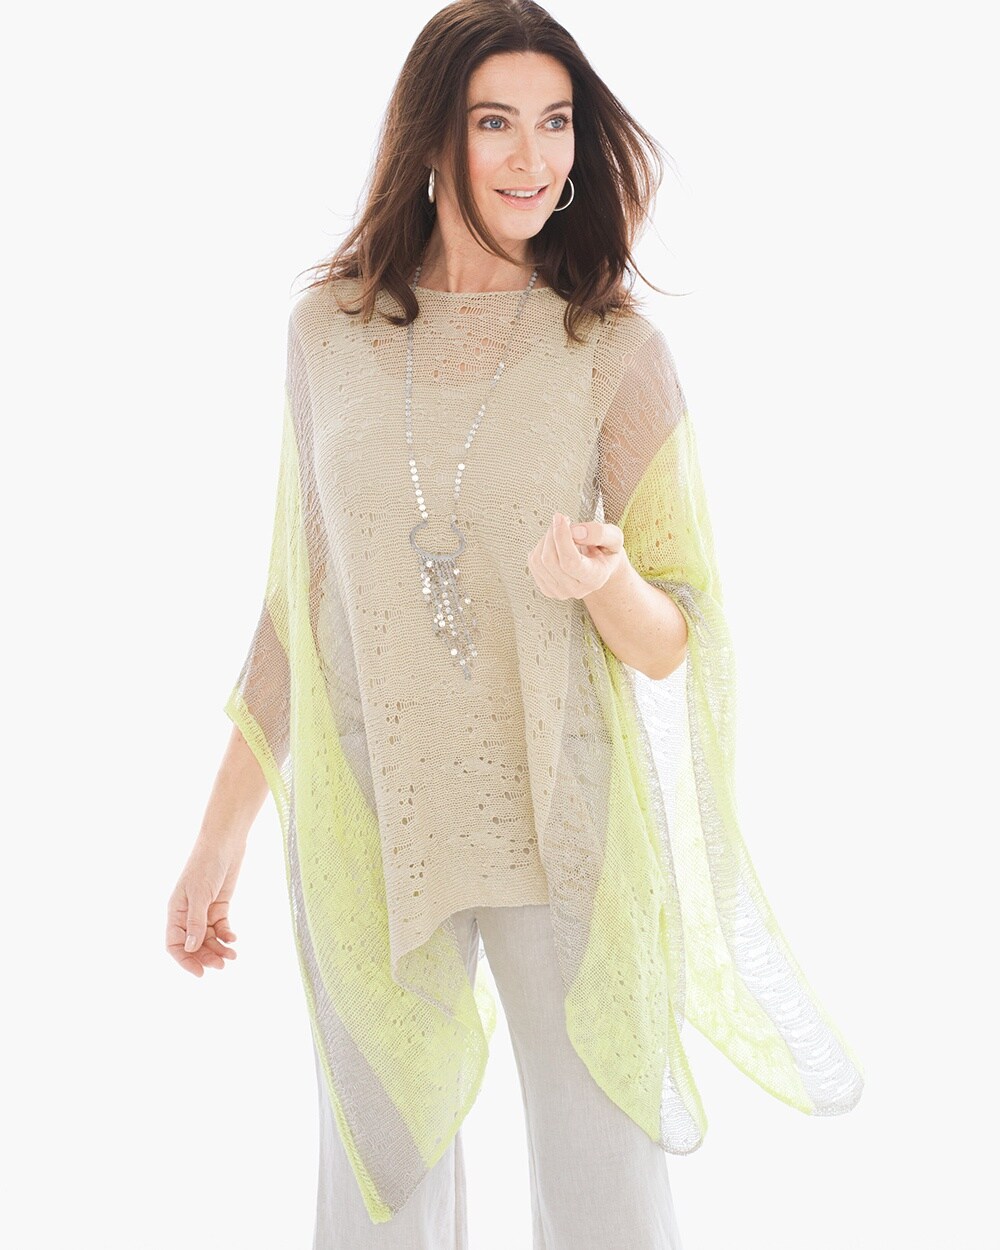 Distressed Daisy Poncho in Chartreuse